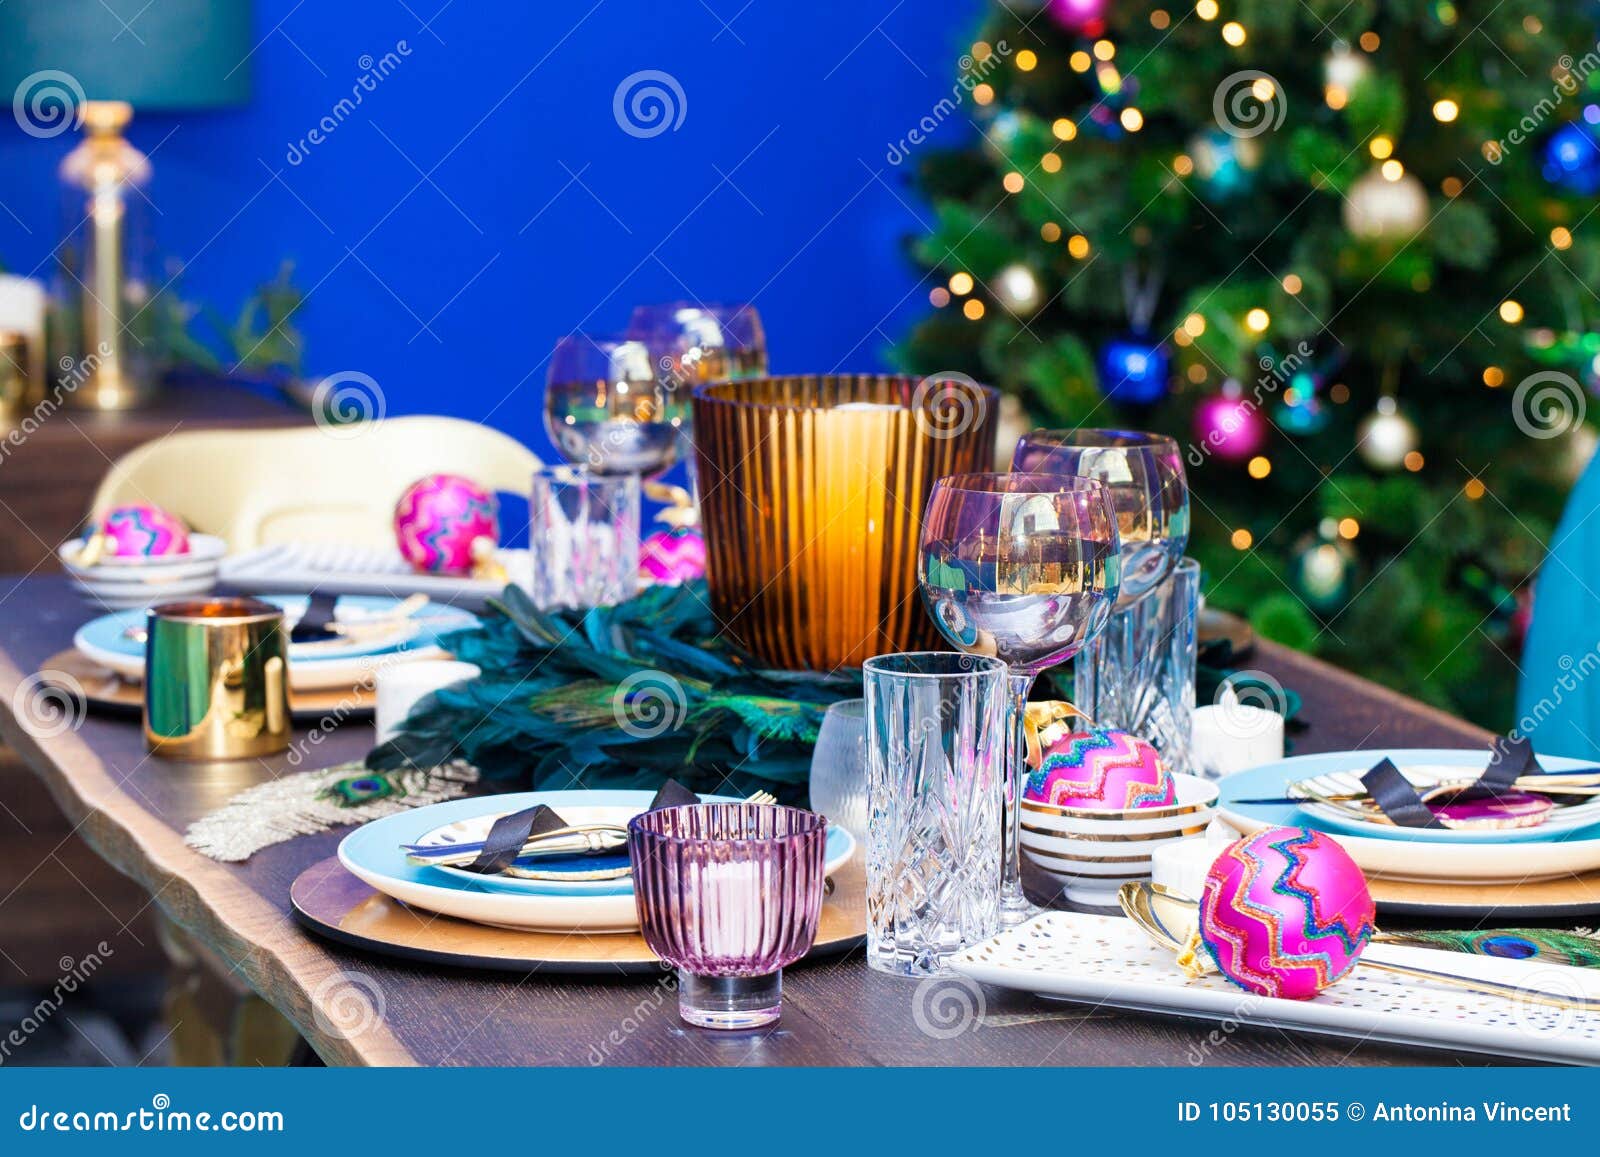 Christmas Dining Room Table Decoration Stock Image - Image of ornament ...